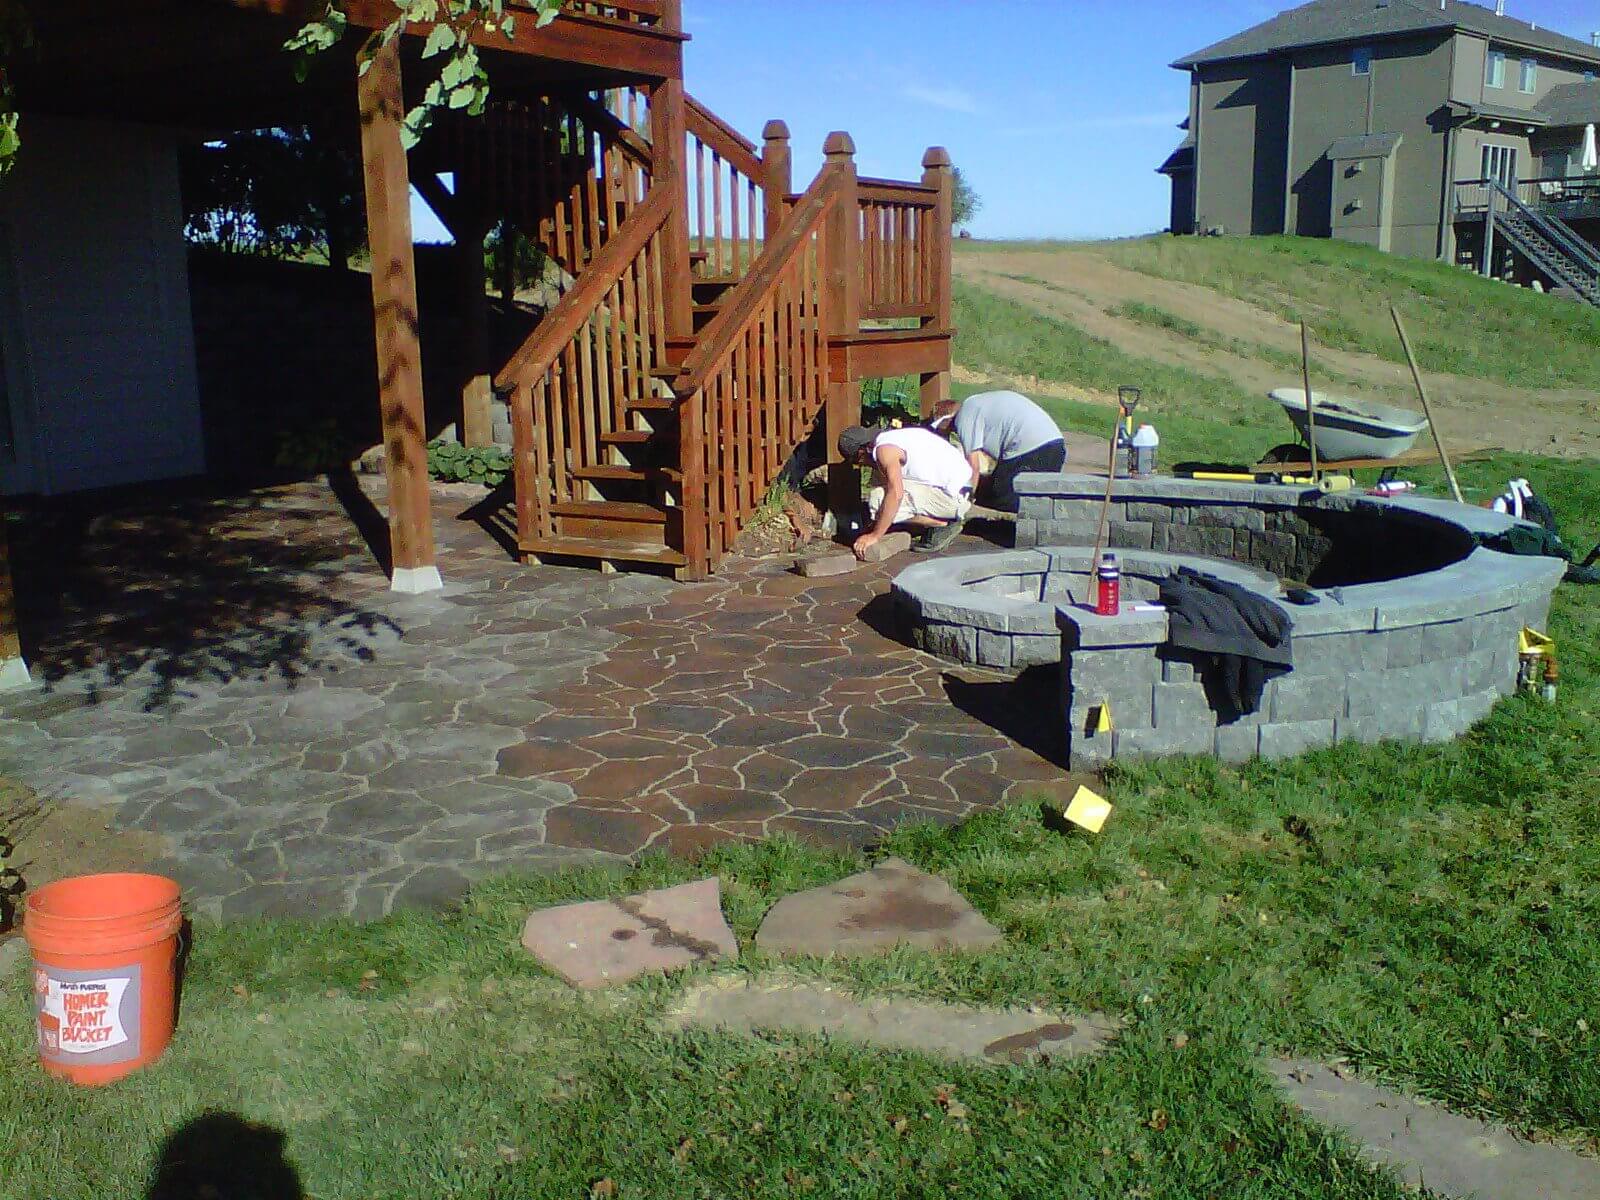 Landscaping professionals working on a custom patio in Omaha, NE.